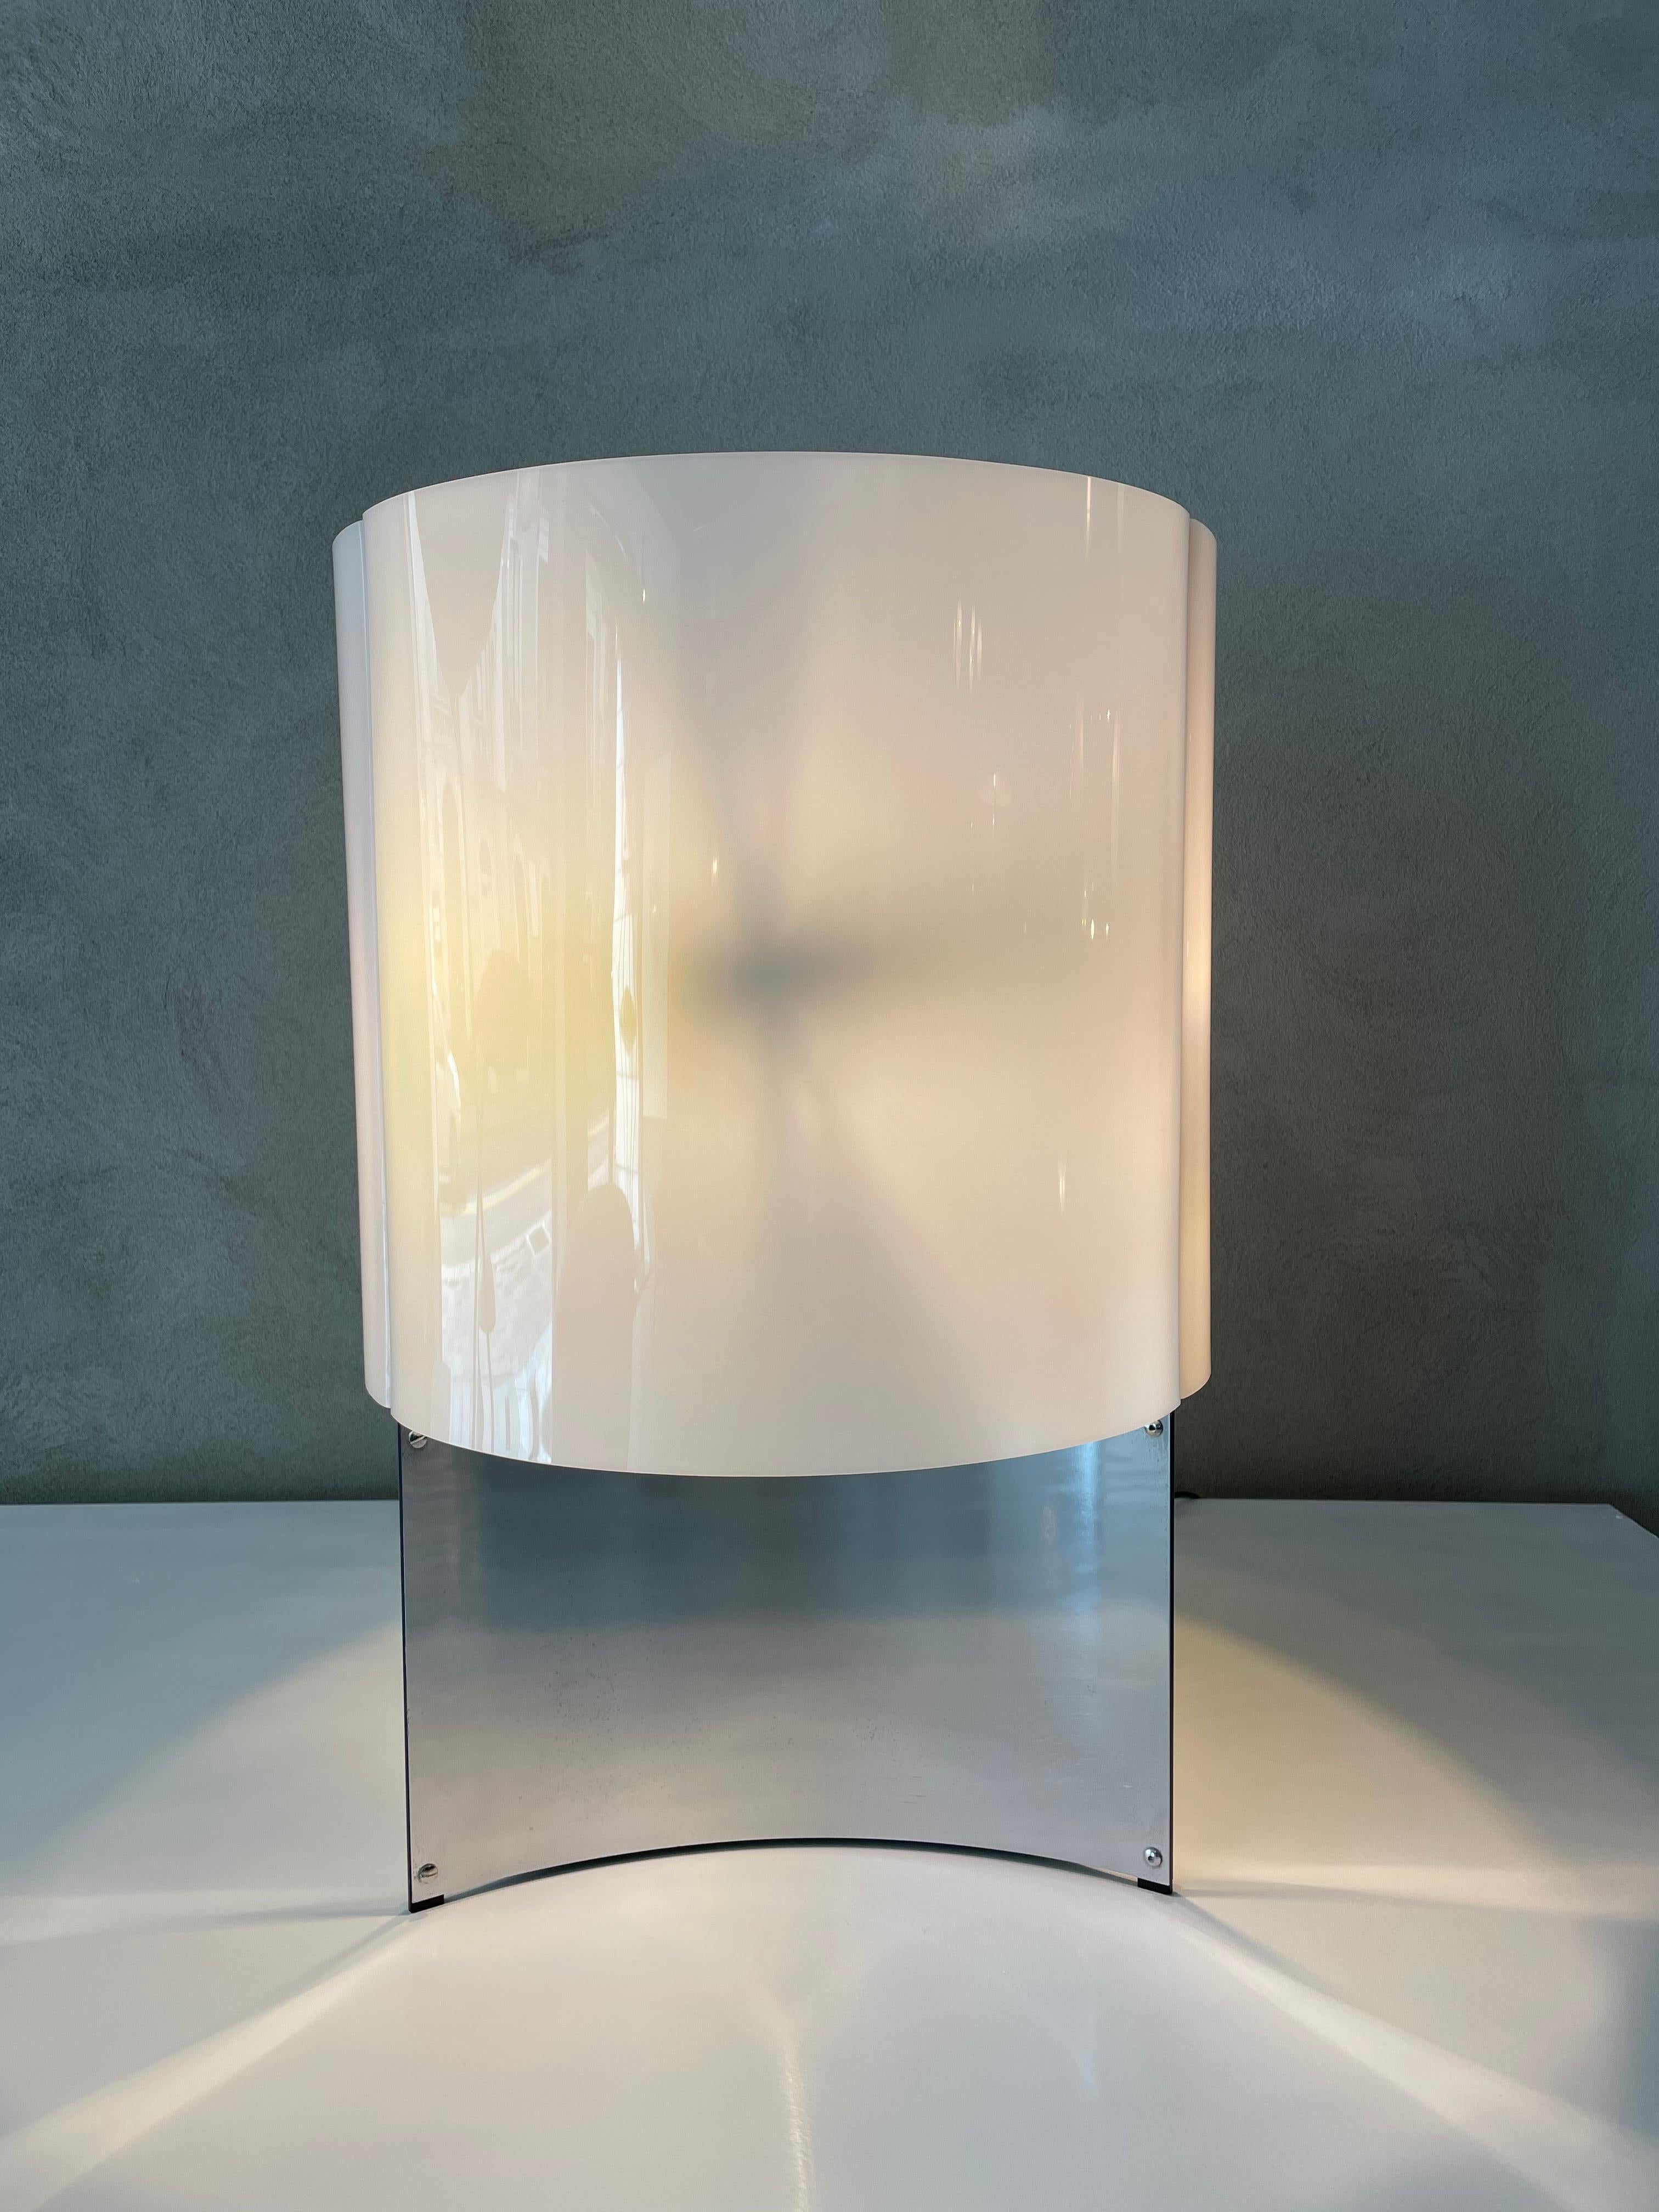 Mod. 526 table lamp designed by Massimo Vignelli for Arteluce, Italy, 1965.
This monumental lamp has a chrome plated metal base and a white perspex shade. The lamp uses 3 light bulbs for ultimate spherical light when lit.
It's in original